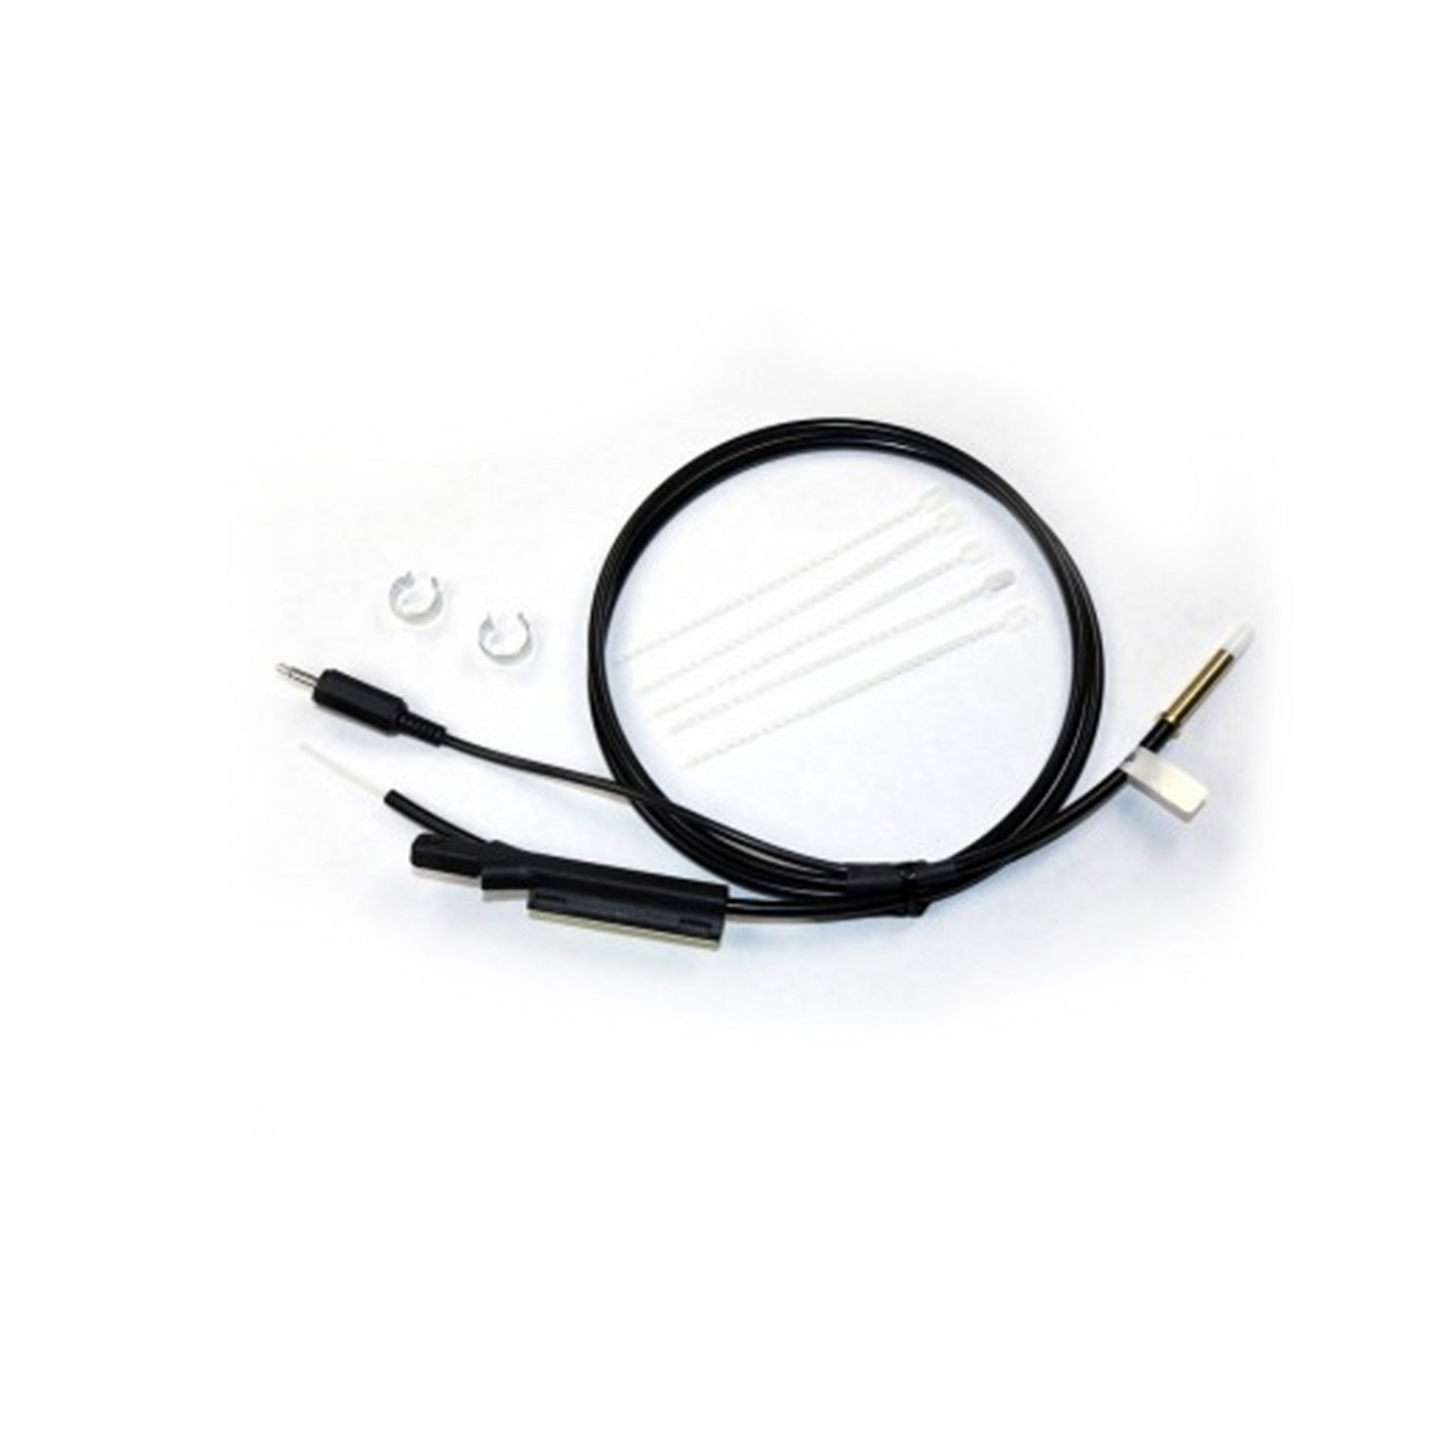 Hakko Products_ B3563 Tube Assembly R 0.6mm-1.0mm_ Soldering Accessories_ Hakko Products